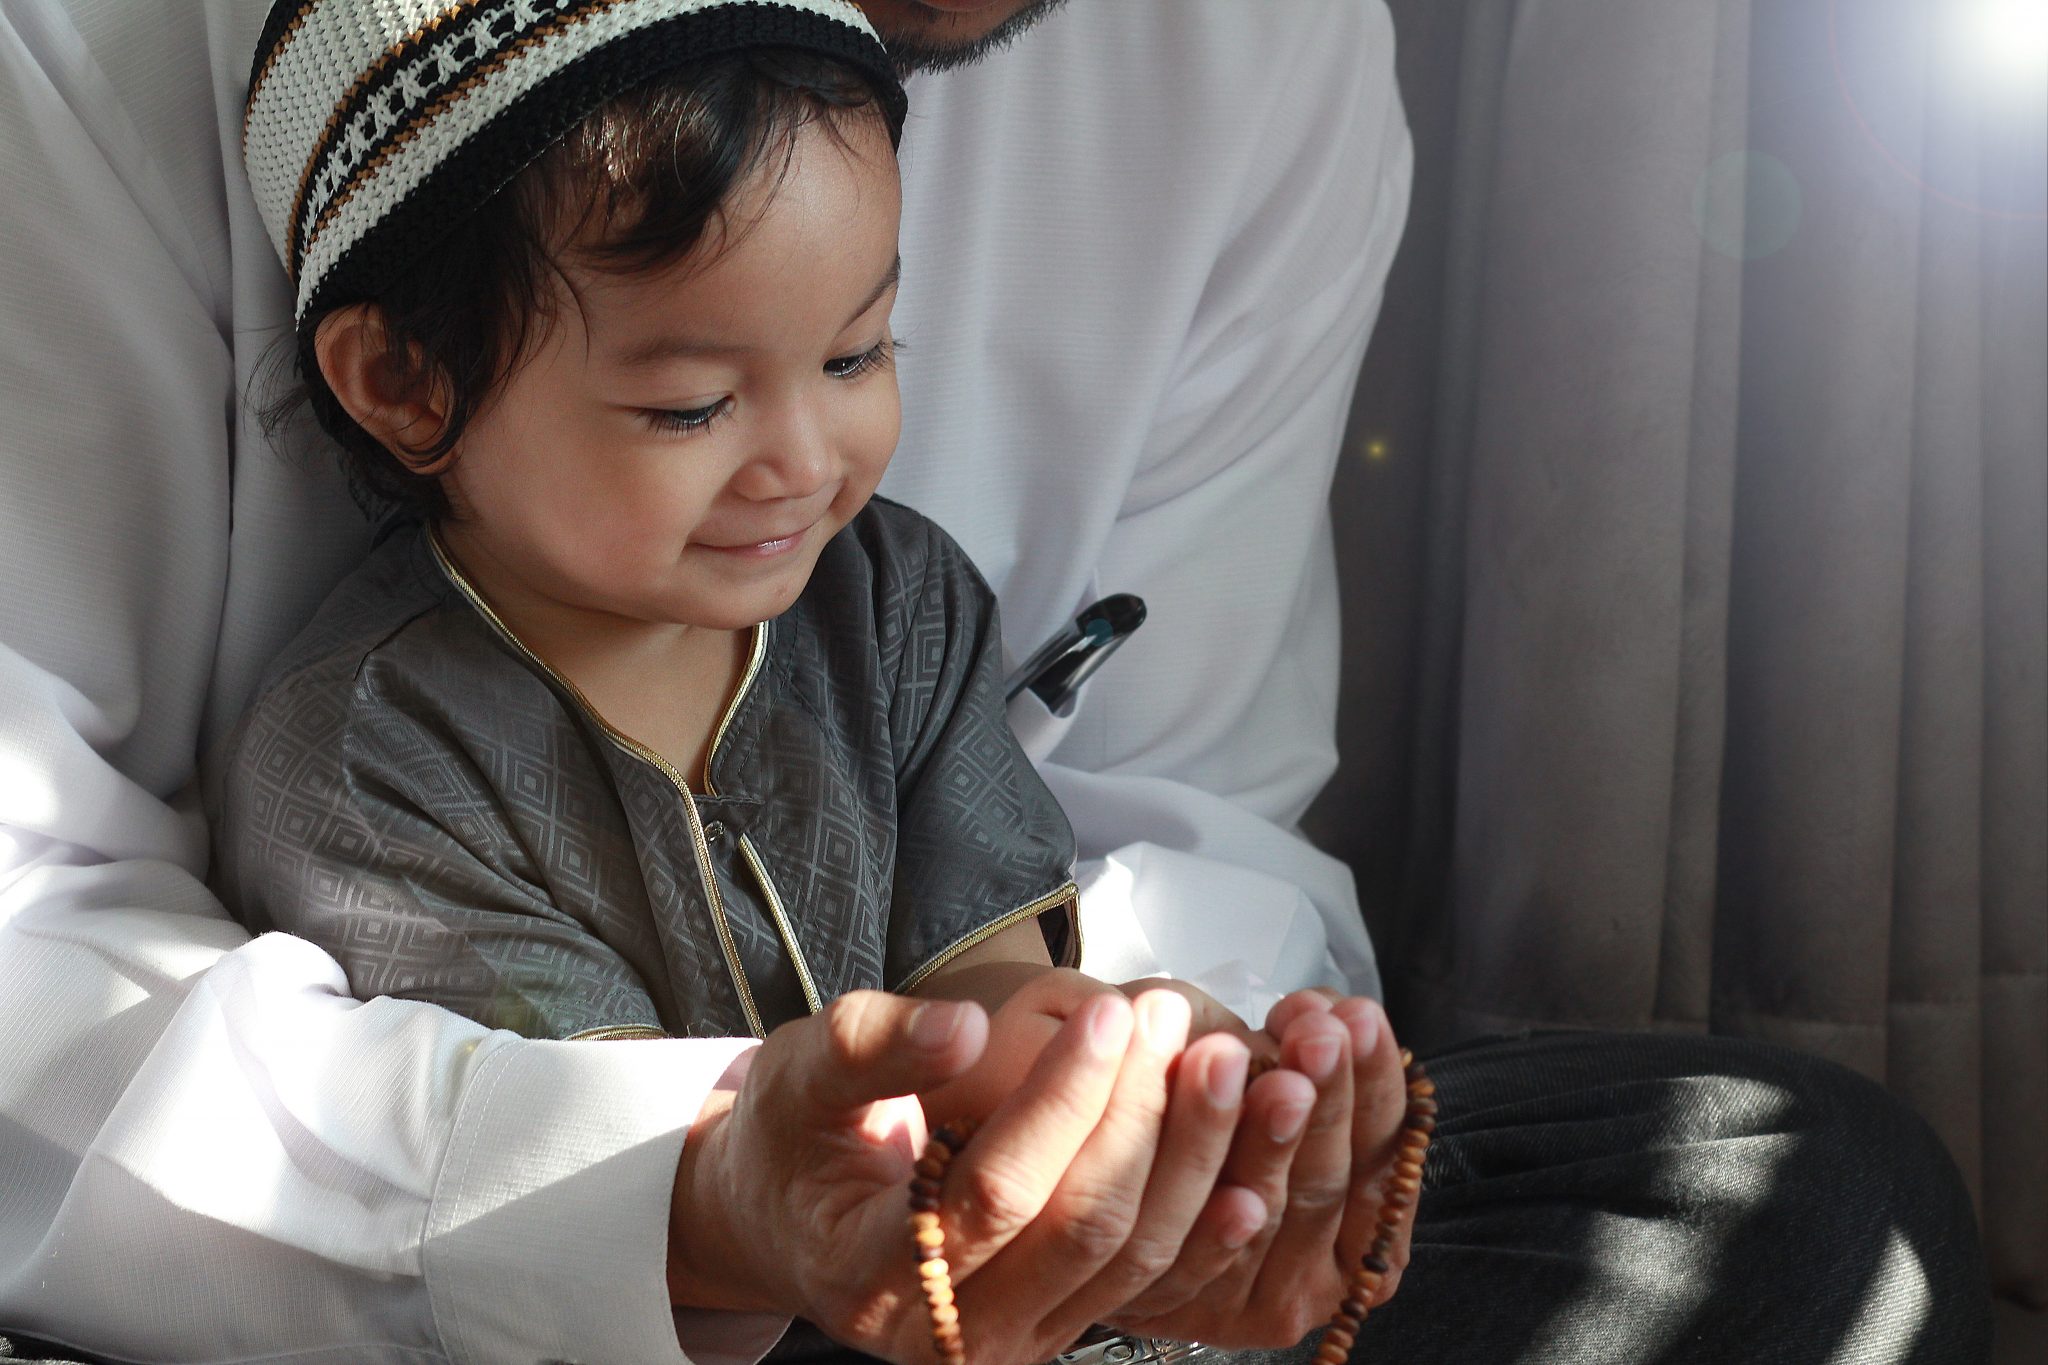 5 simple ways to teach kids about Islam - The Muslim Vibe